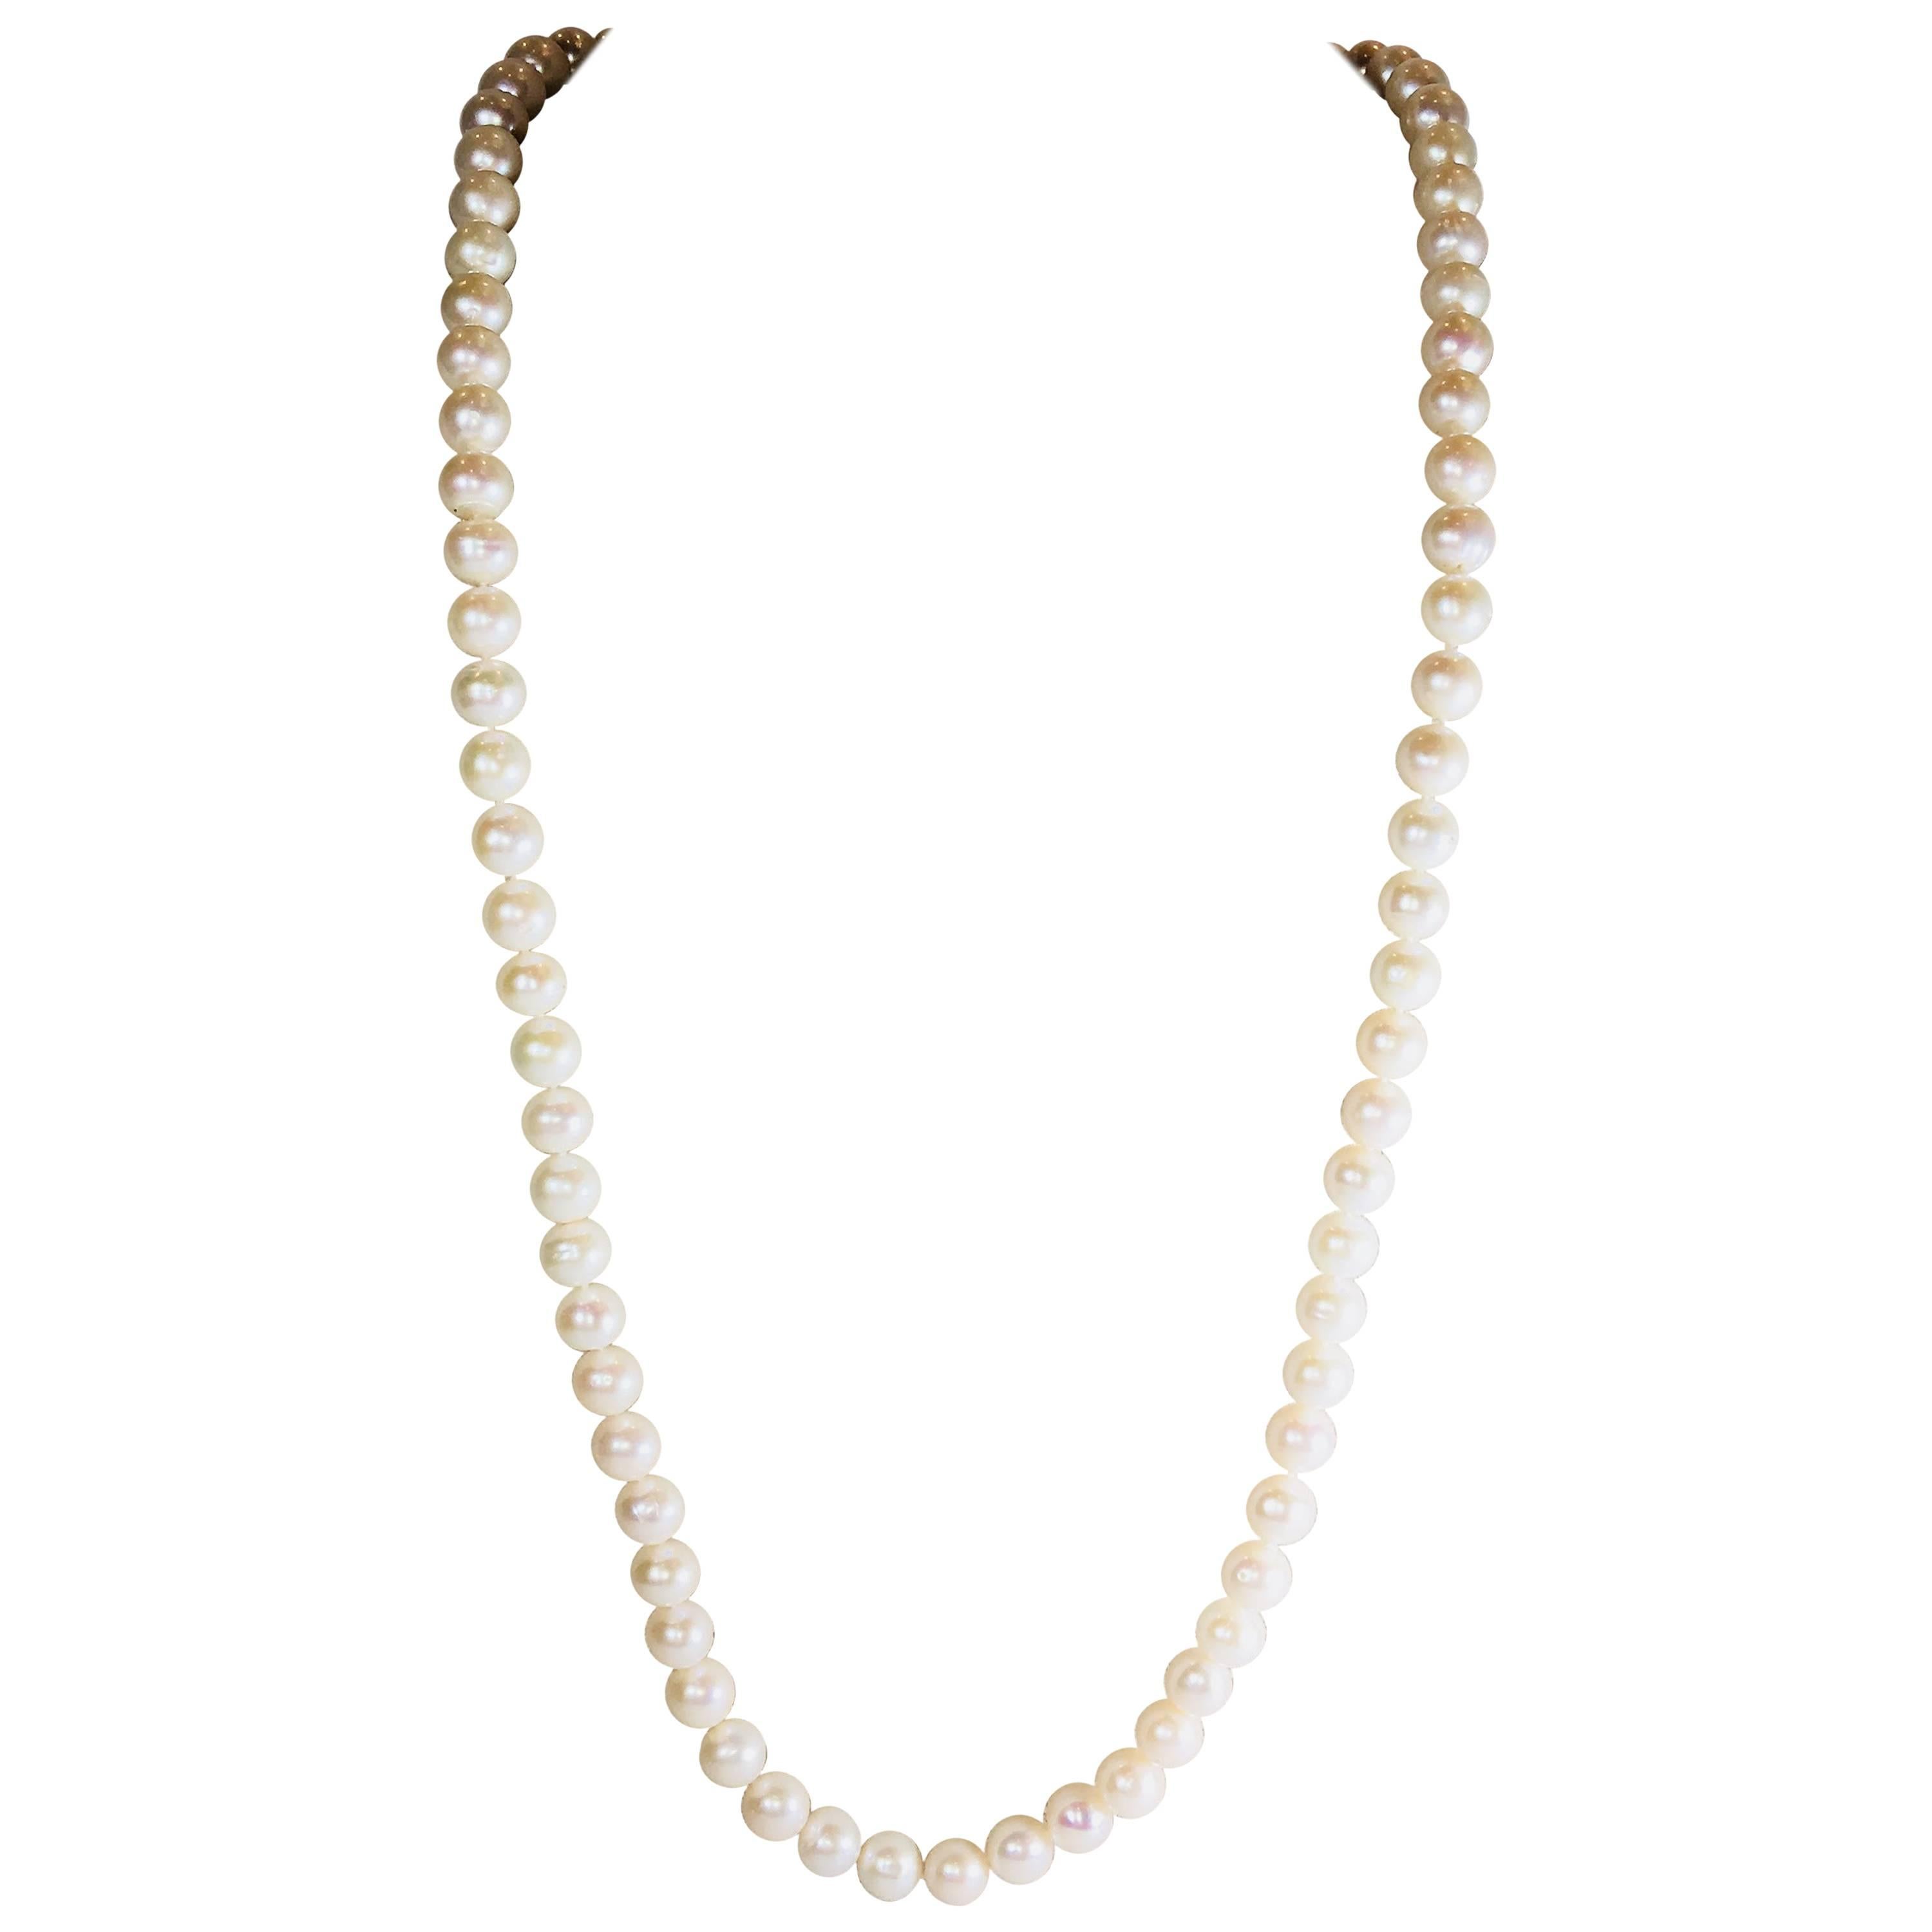 10-10.5mm Freshwater Pearl Necklace